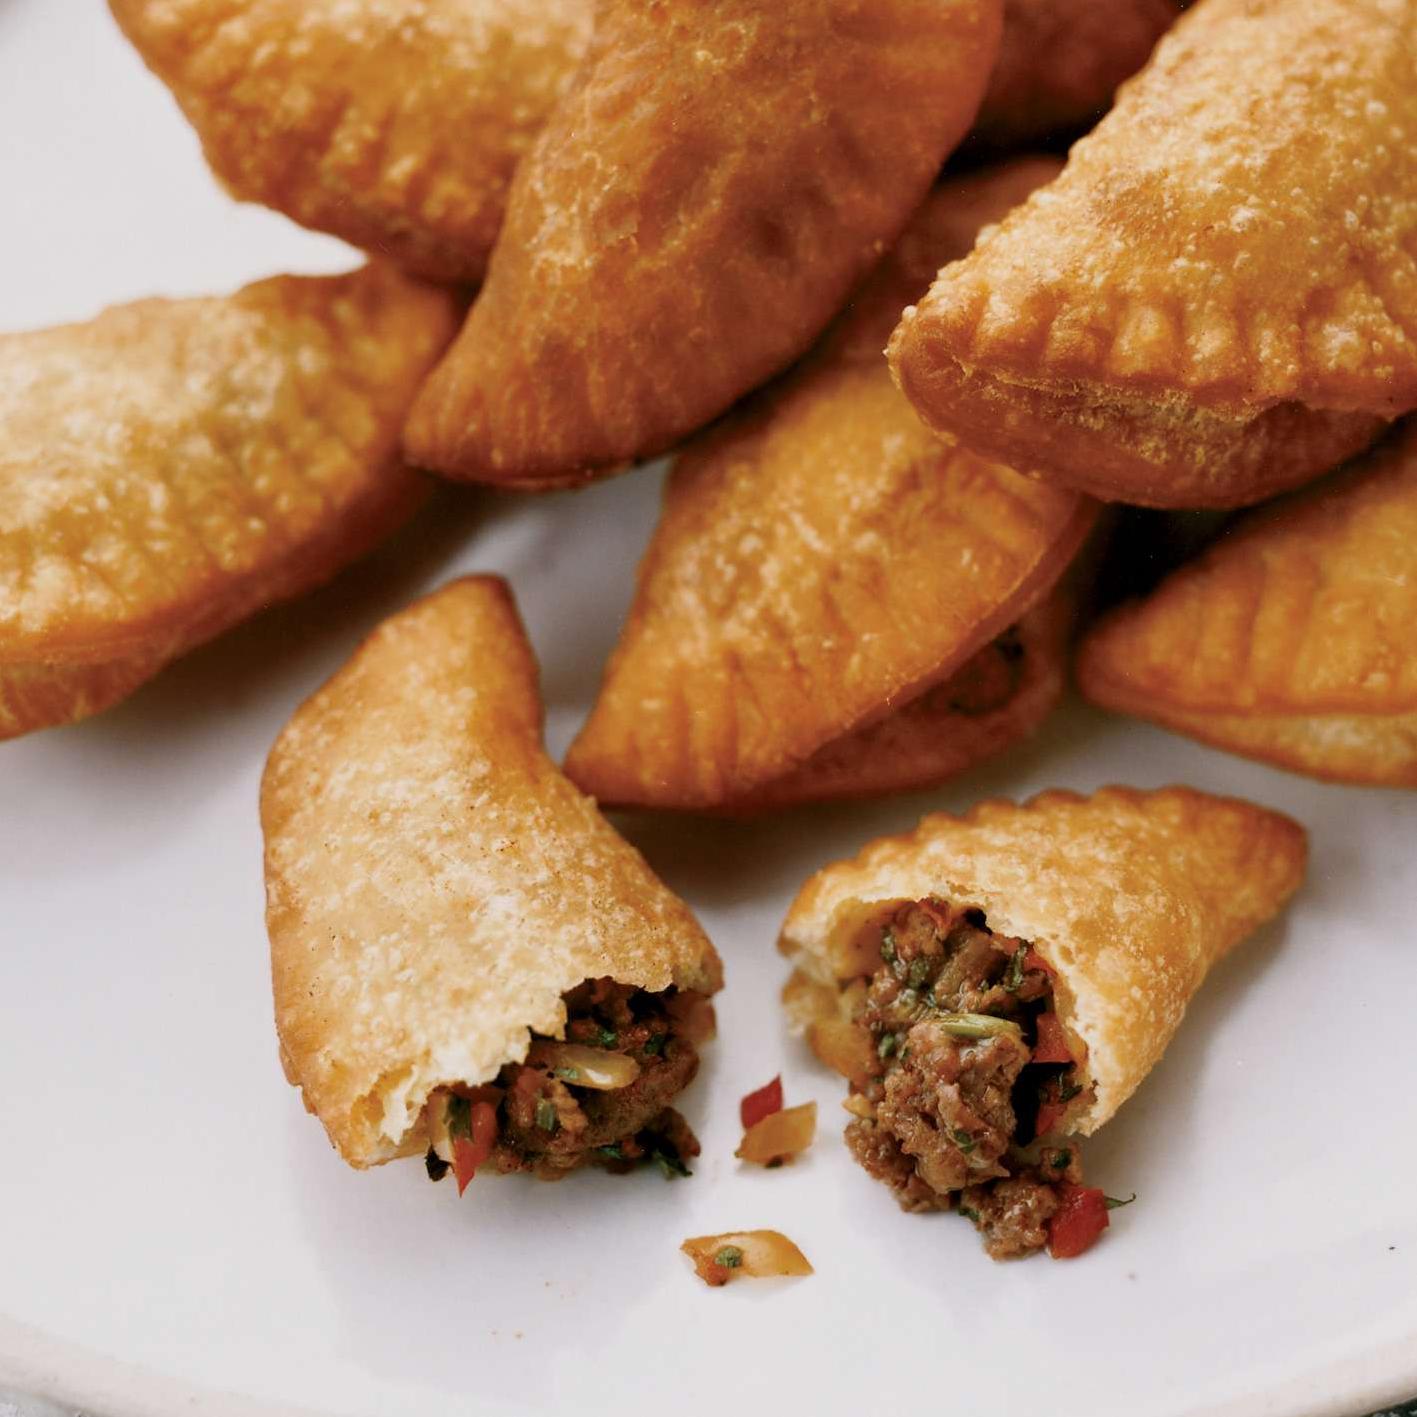  These empanadas are perfect for sharing with friends and family at your next party!